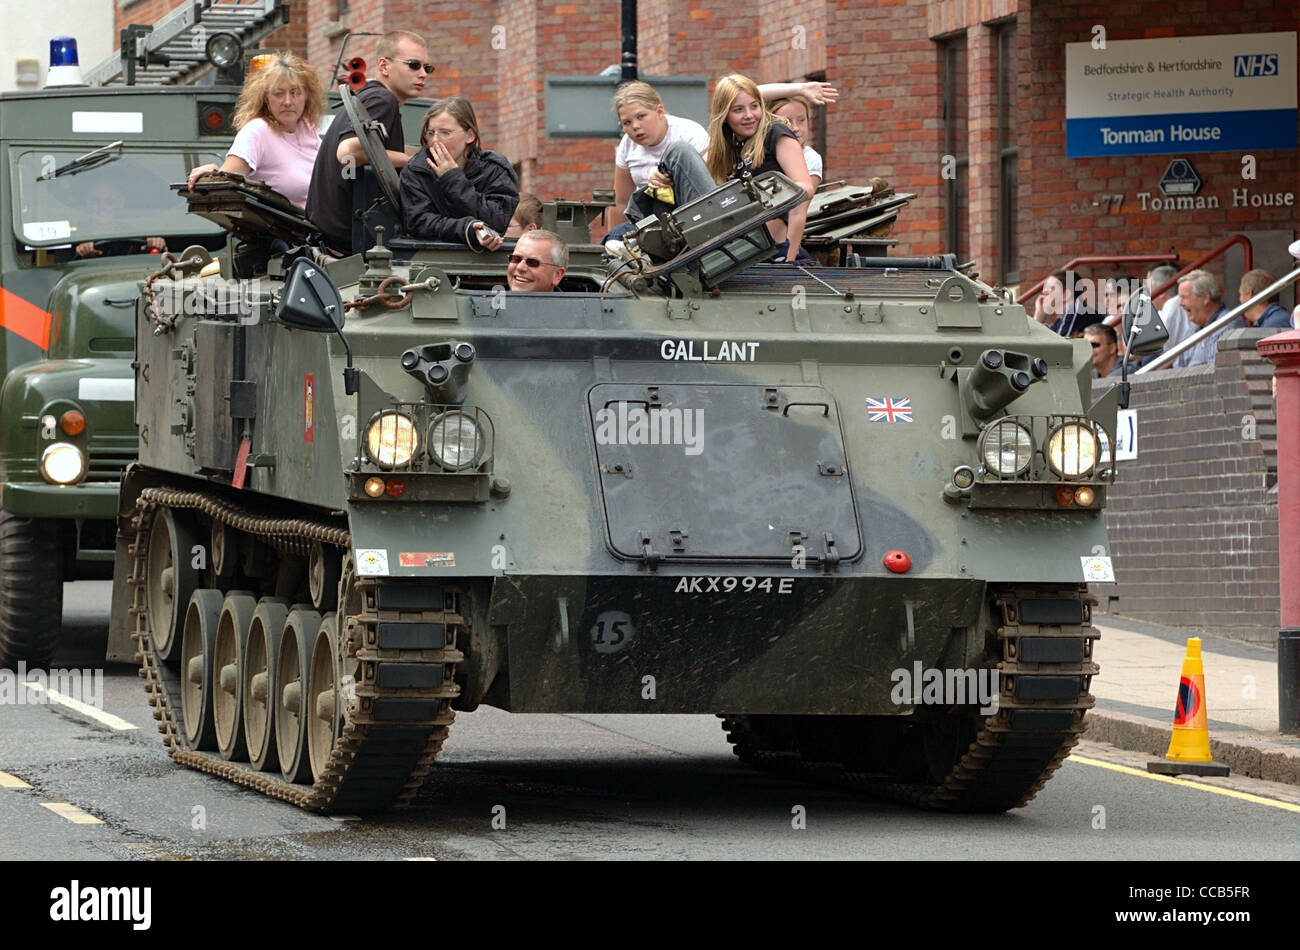 London Barmy Army with FV 432 armoured personnel carrier, in carnival procession, St Albans, UK. Stock Photo